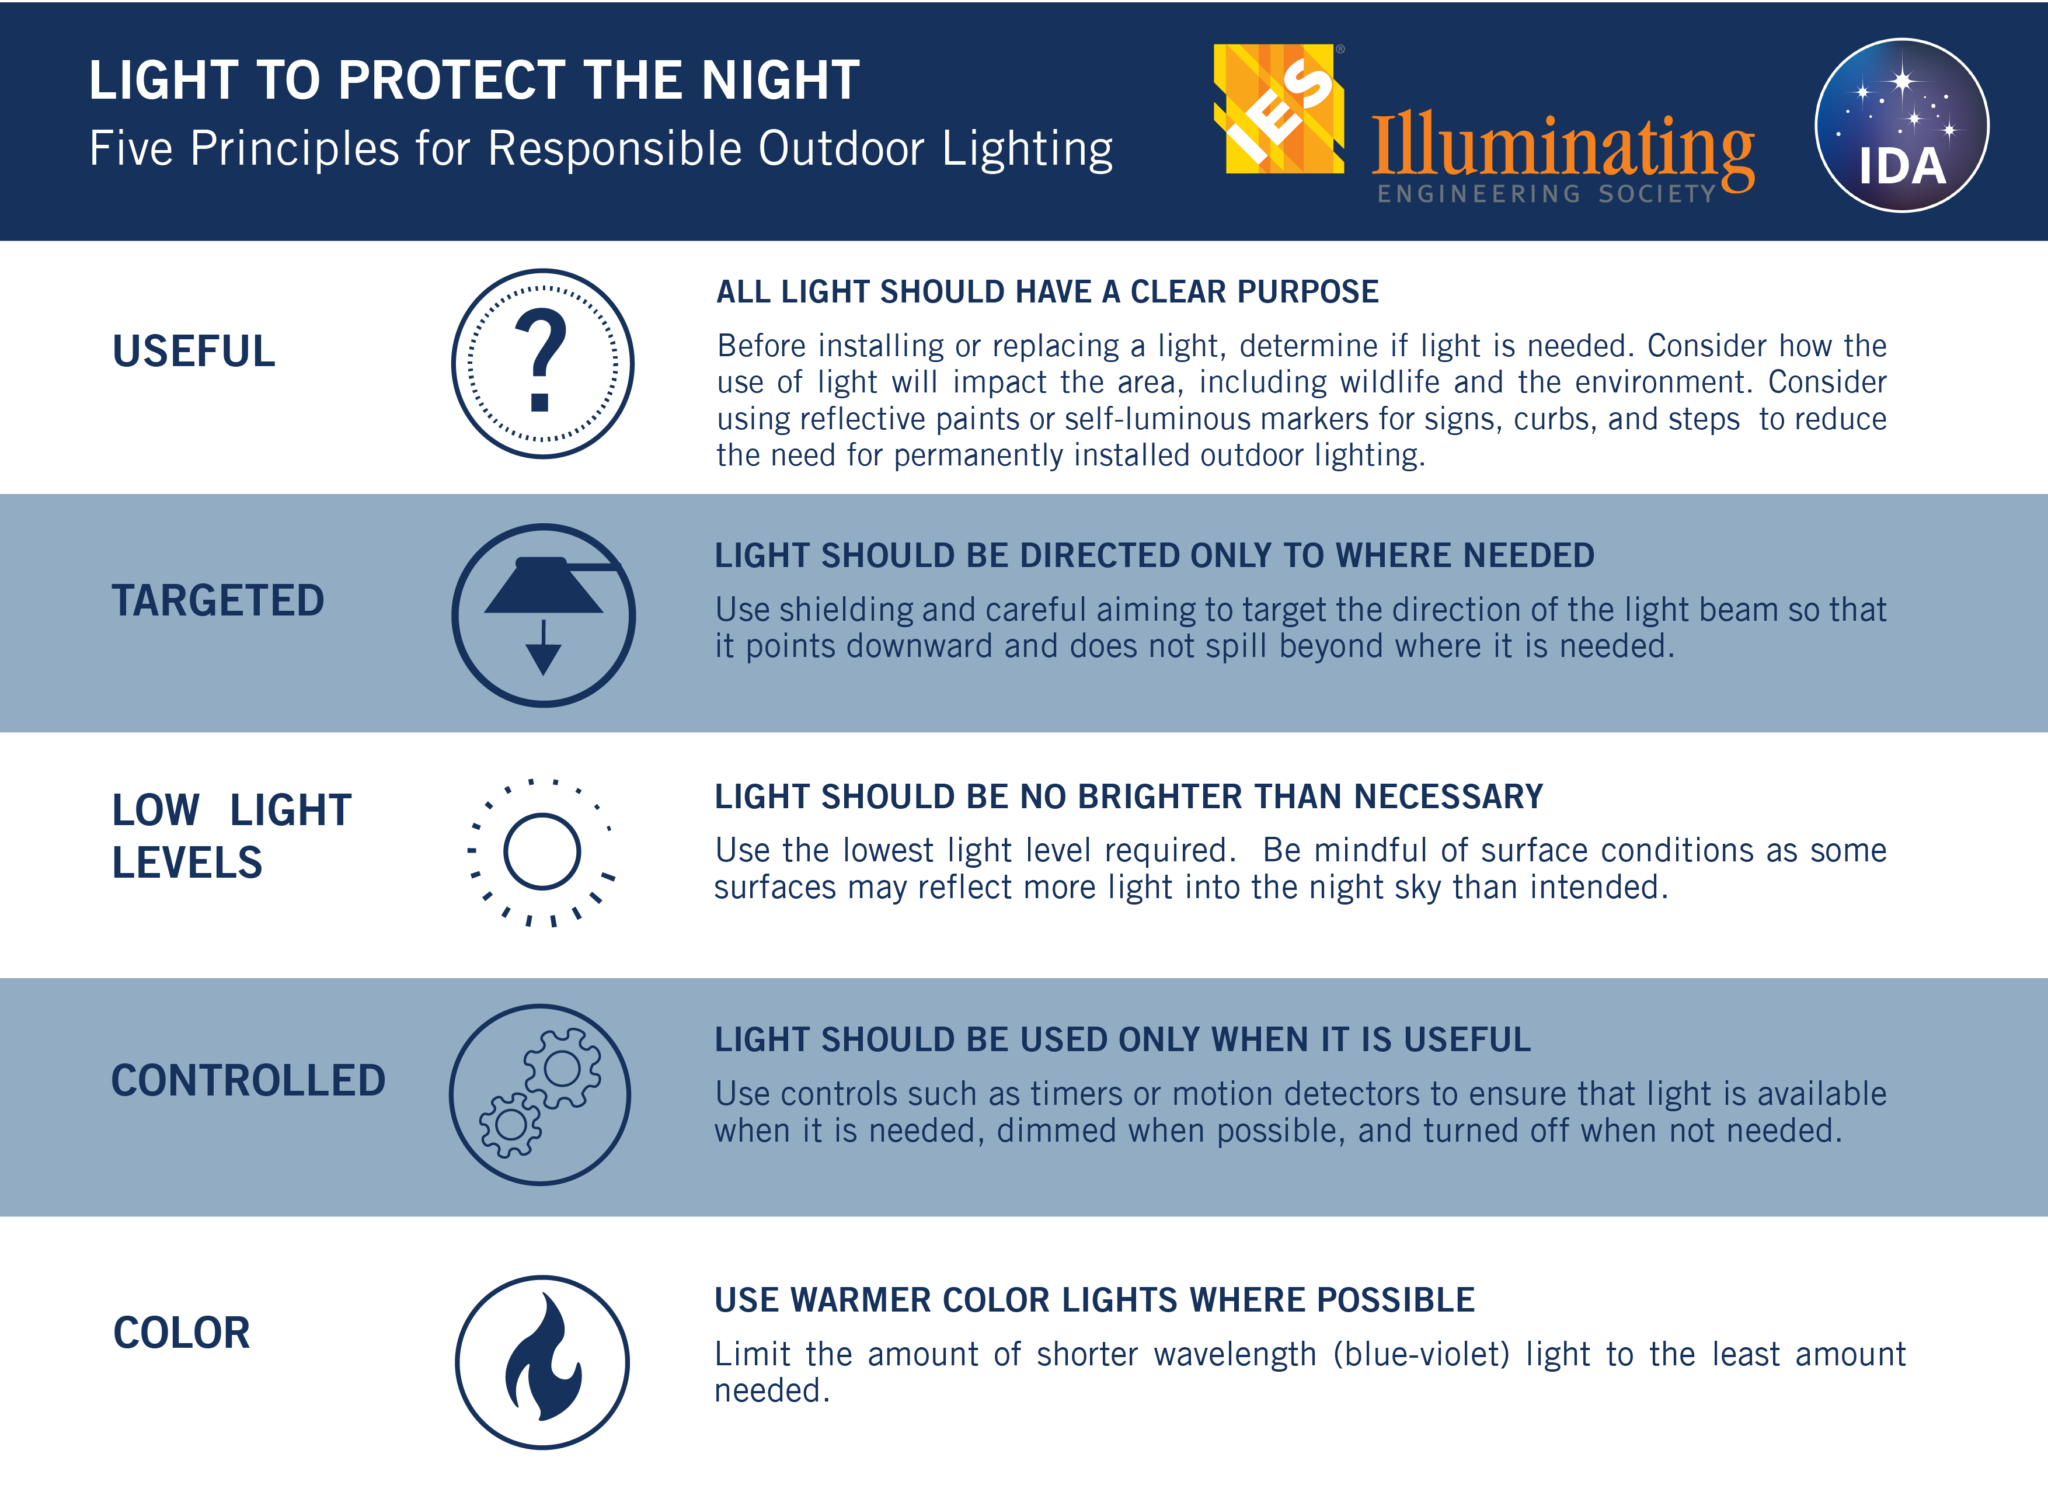 Light tp Protect the Night IAS & IES Infographic 